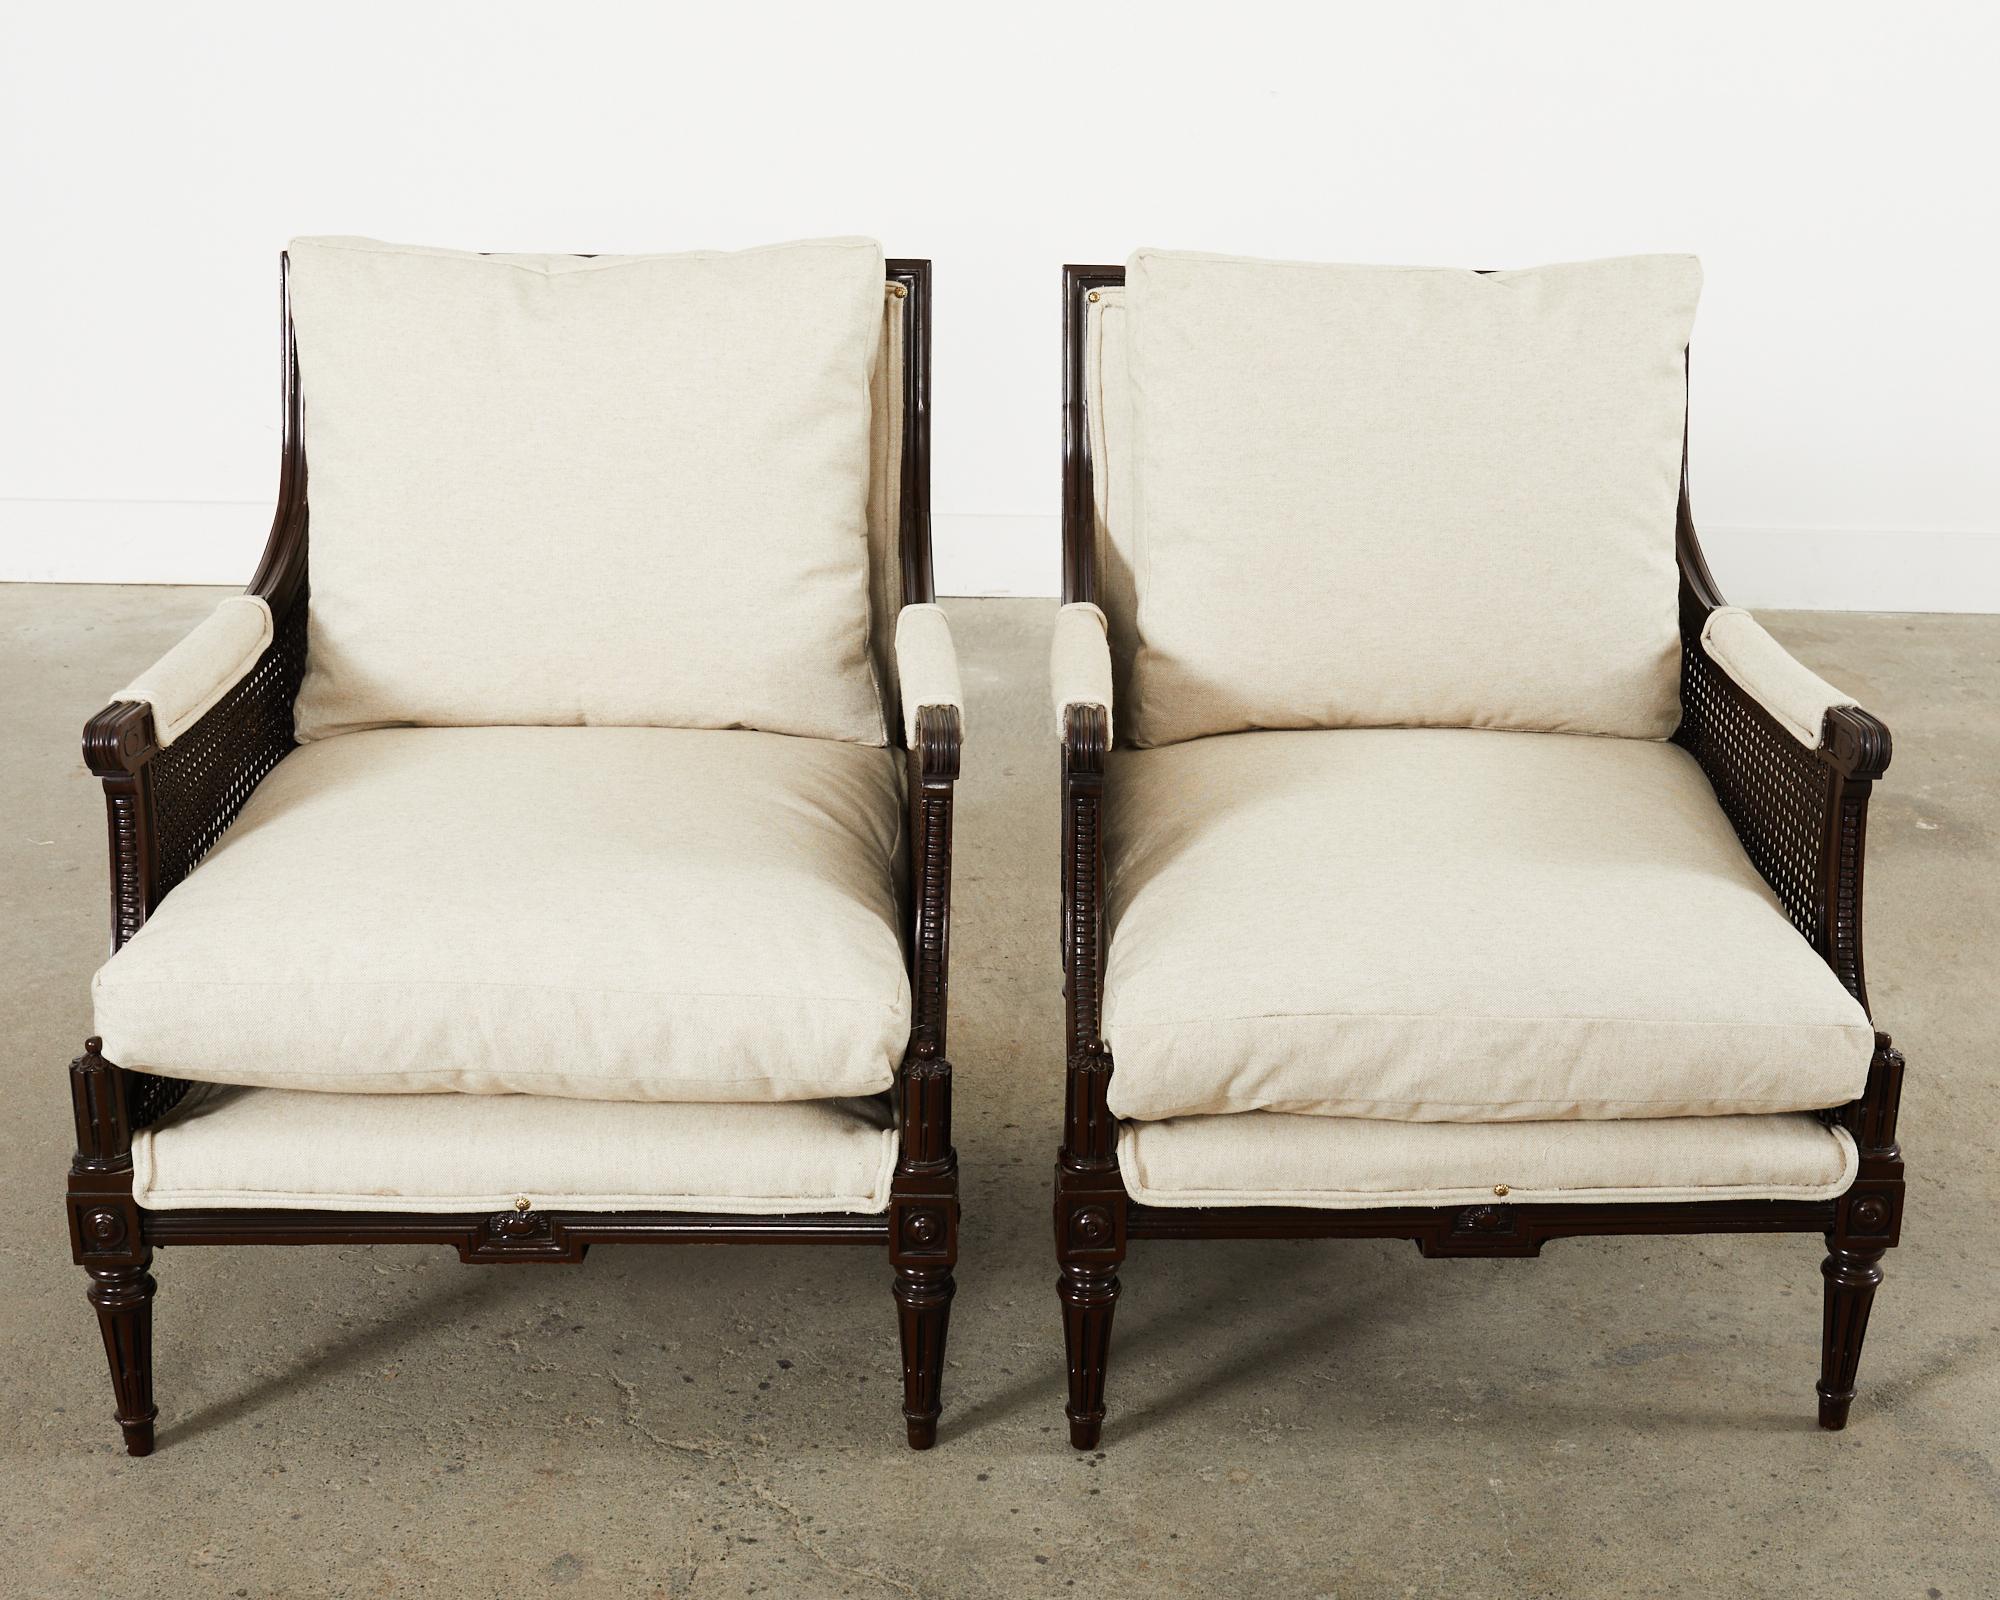 French Pair of Neoclassical Louis XVI Style Caned Bergere Lounge Chairs